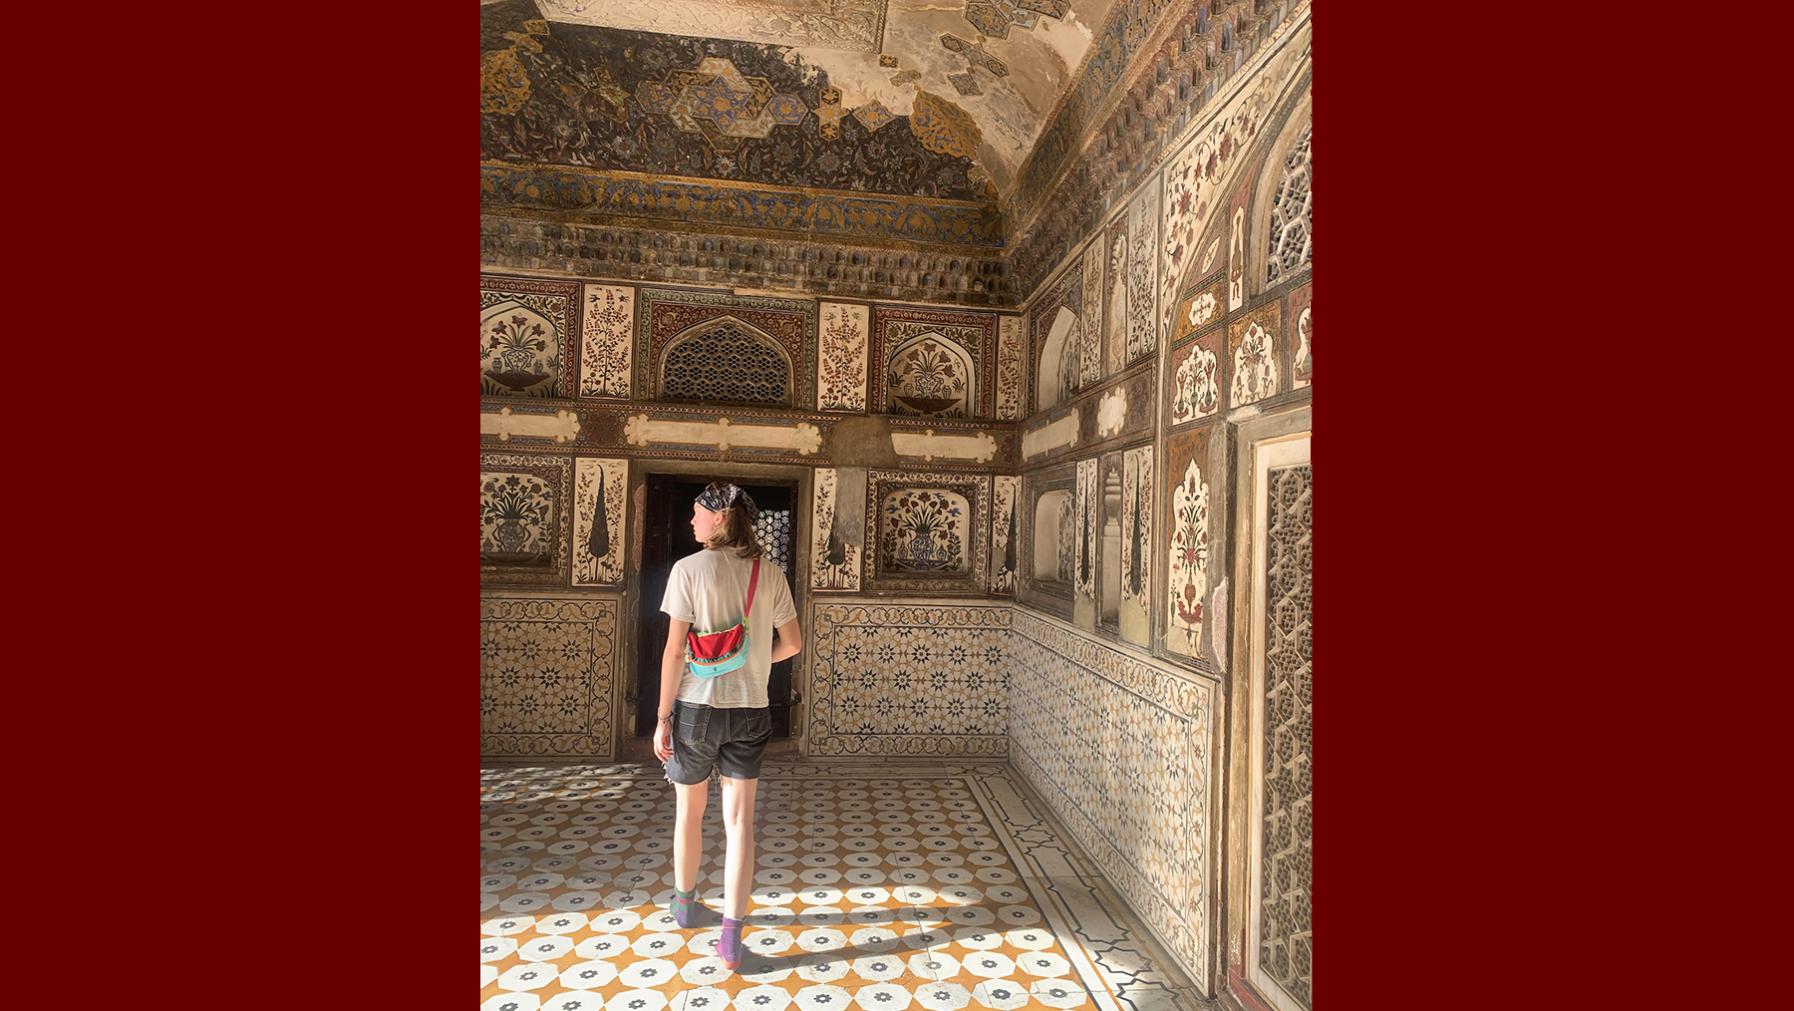 Rhae Schulz-O’Neil at Itimad-ud-Daulah in Agra